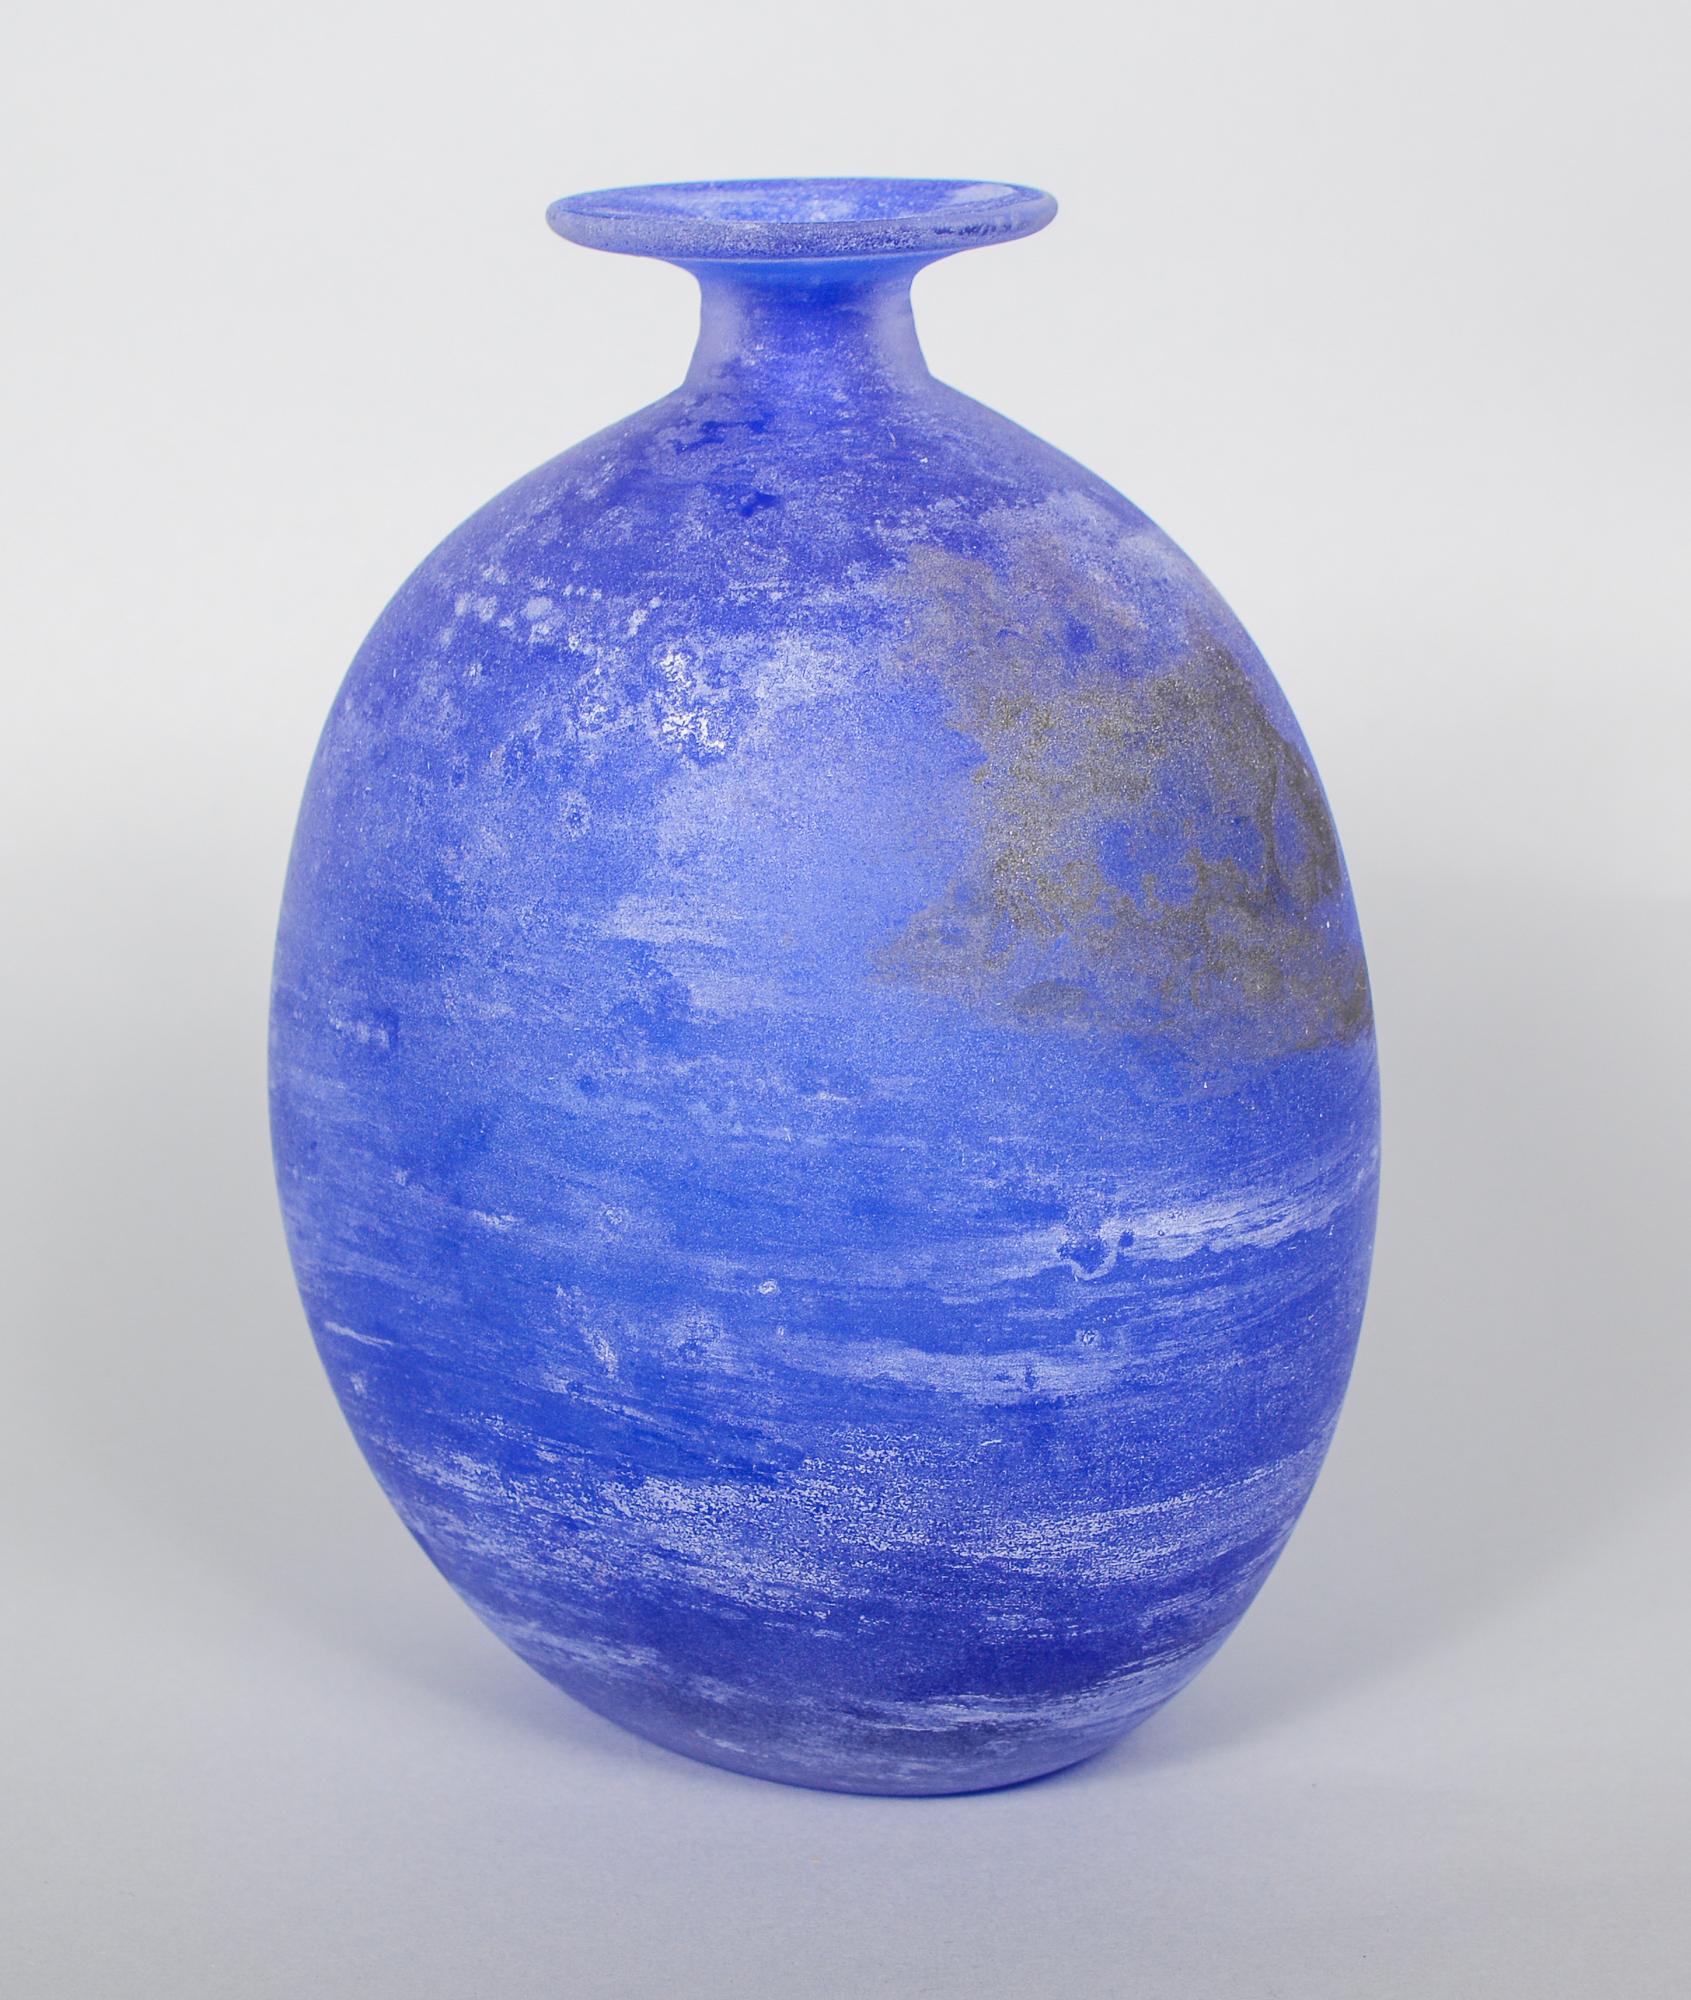 Cenedese glass in a bulbous bottle form. The glass is in the scavo technique that is meant to look like excavated ancient glass.